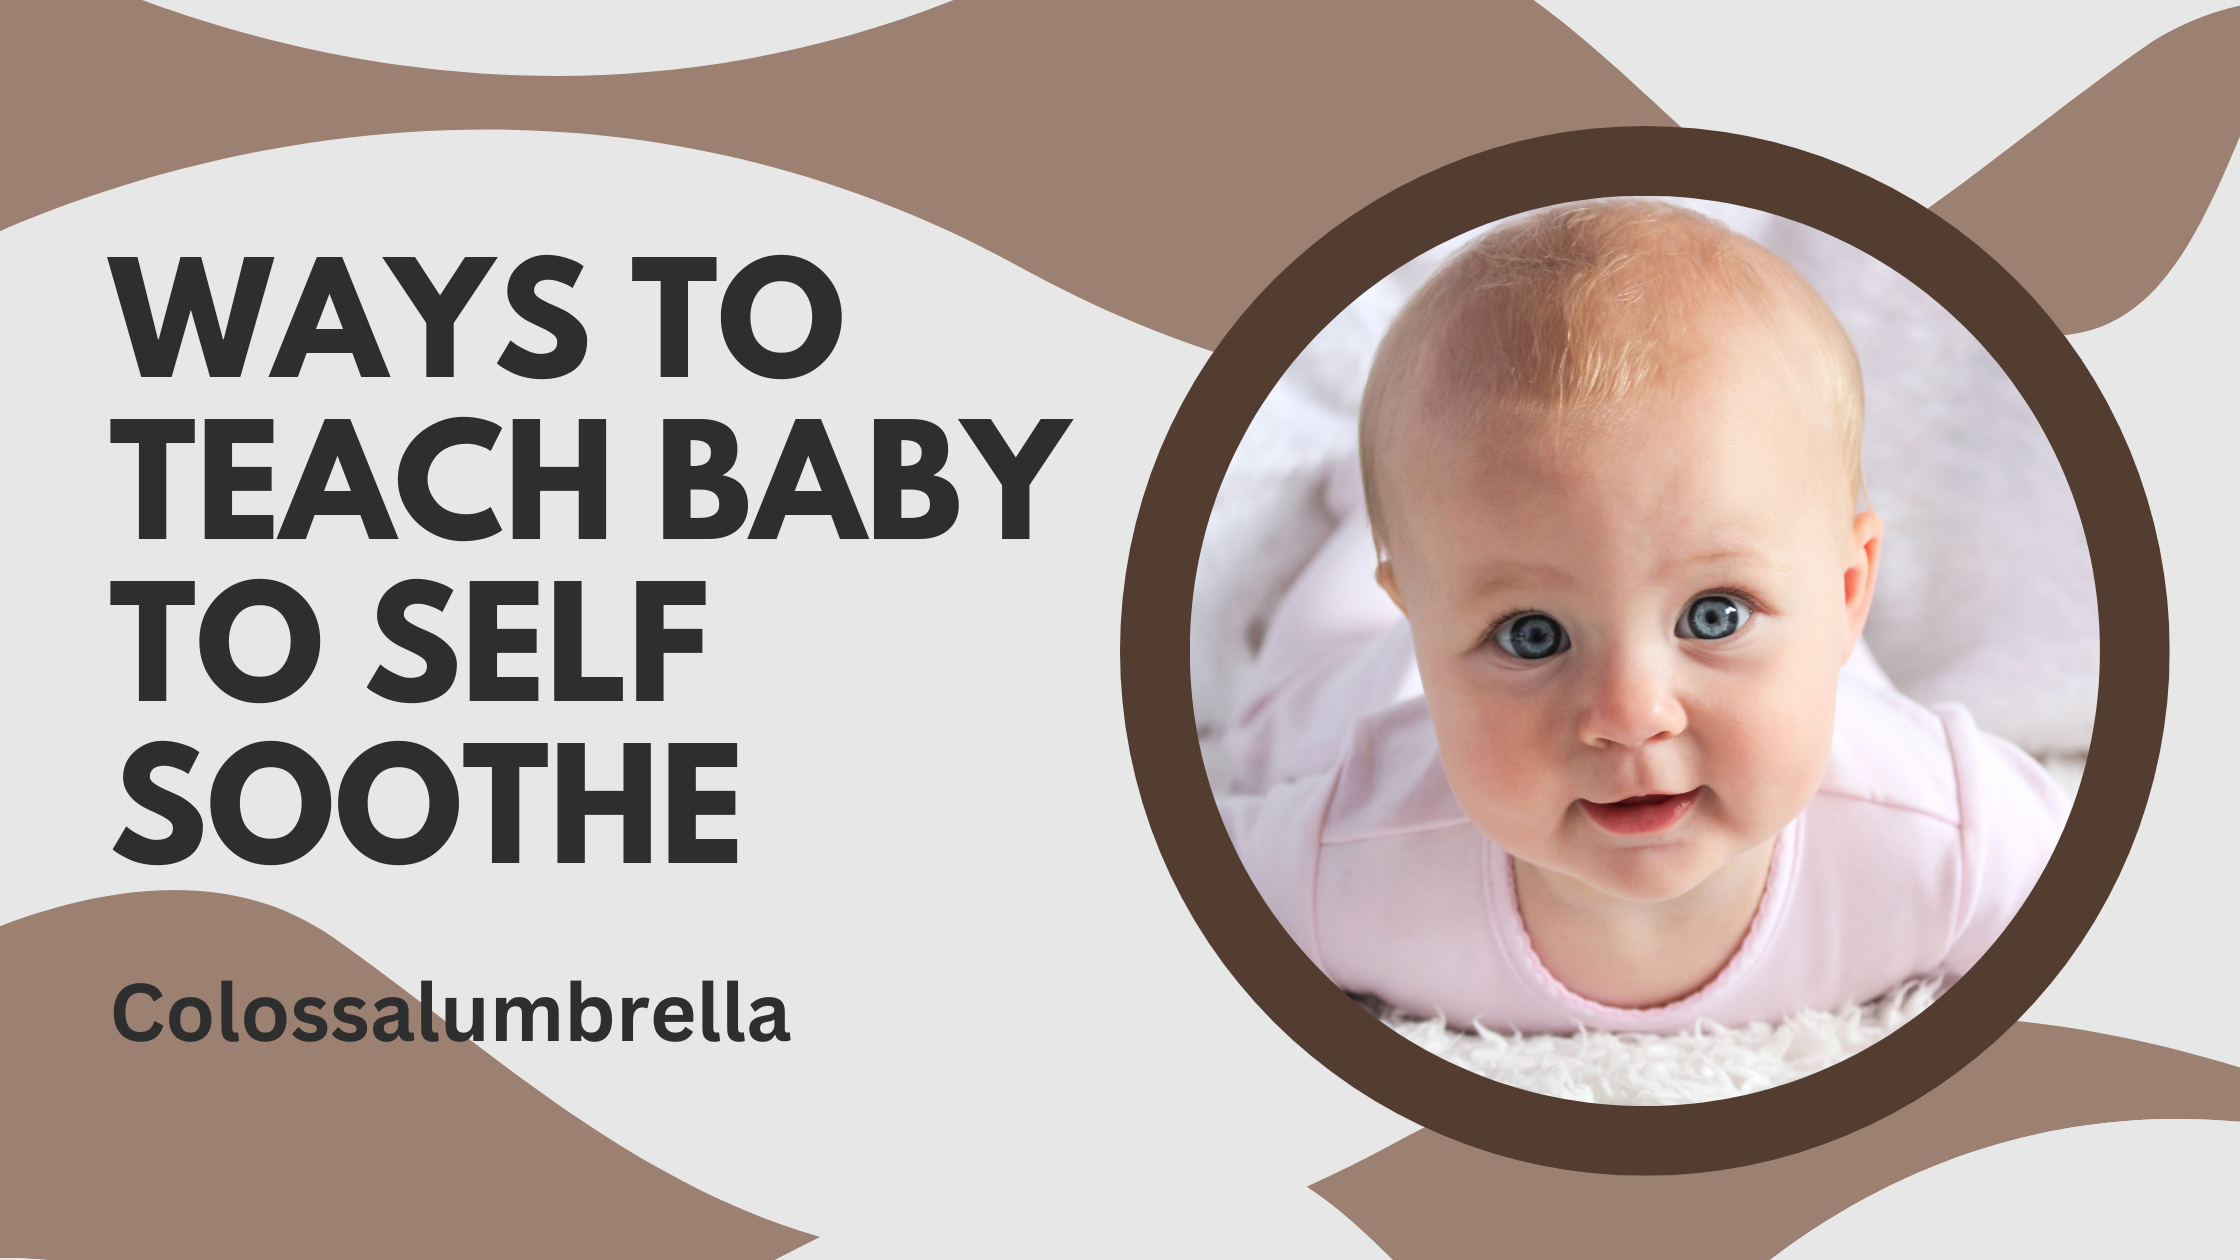 4 Easy Ways on How to teach baby to self soothe